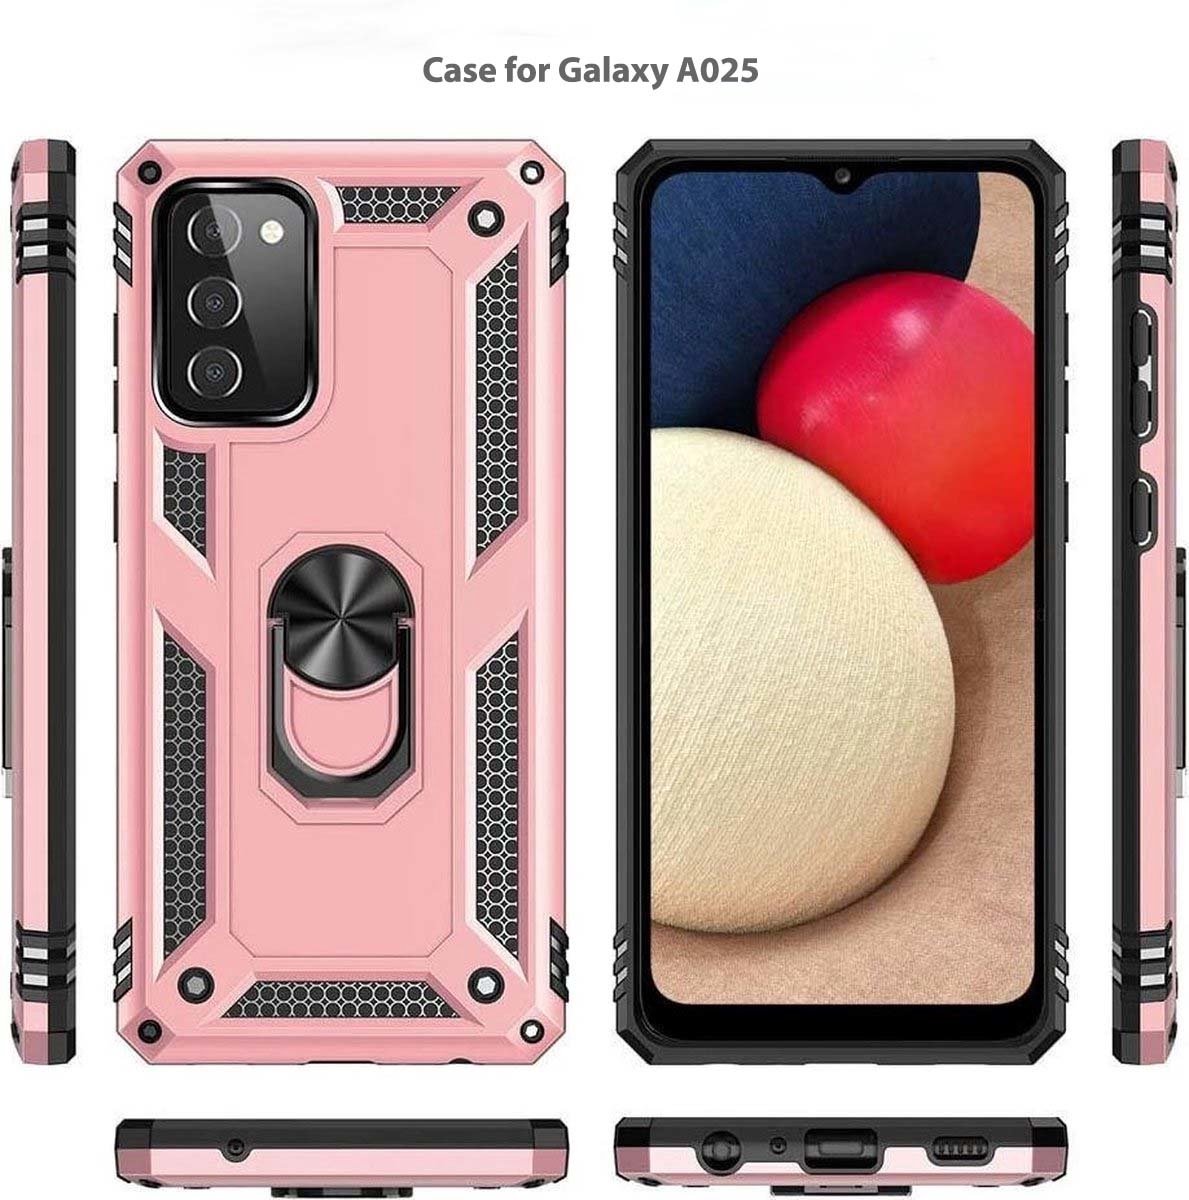 Hoesje Geschikt Voor Samsung Galaxy A02s Hoesje Armor Anti-shock Backcover Rose Goud - Galaxy A02s - A02s Backcover kickstand Ring houder cover TPU backcover oTronica